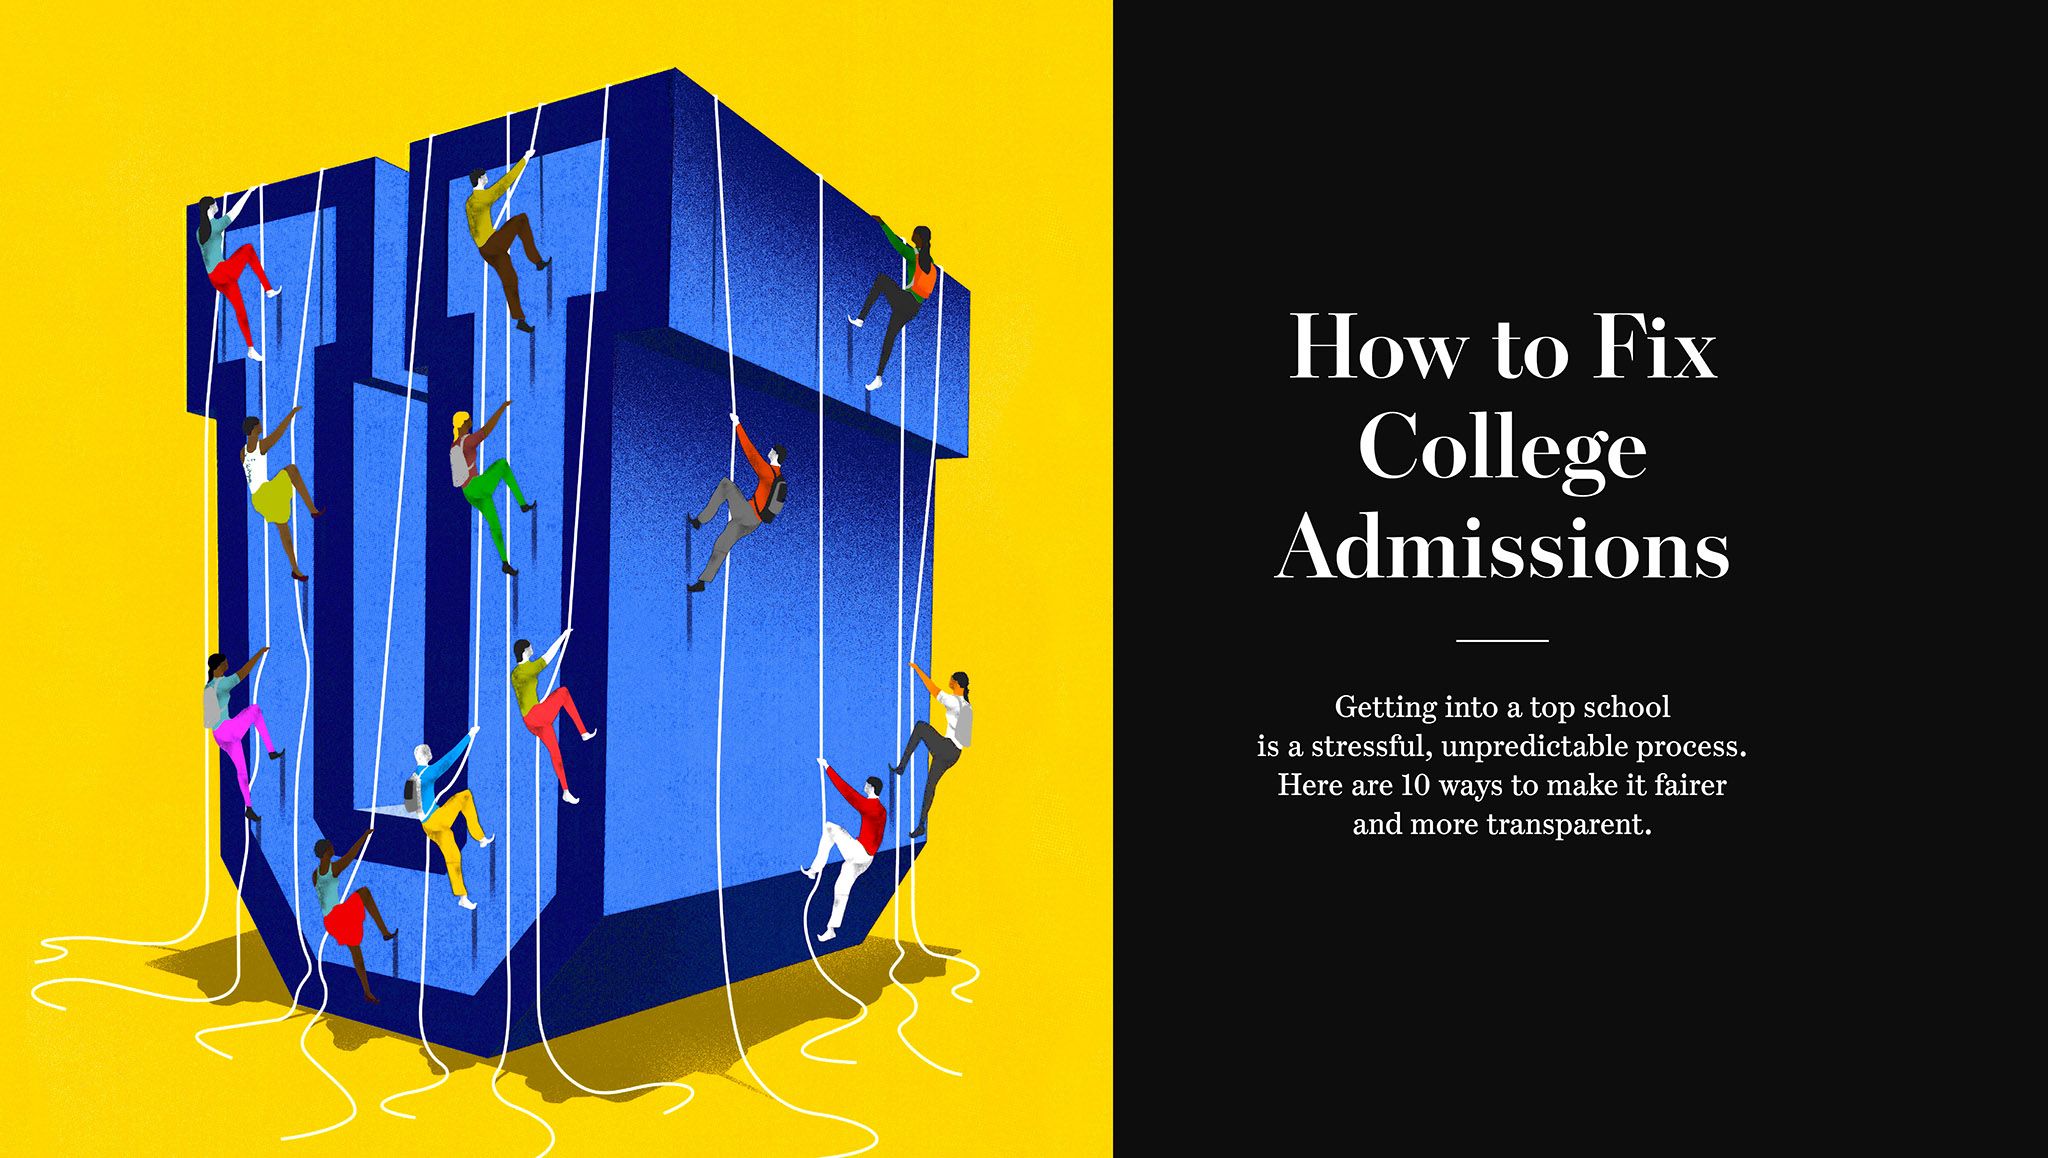 Improving the College Admissions Process: Effective Solutions for a Fair and Accessible System